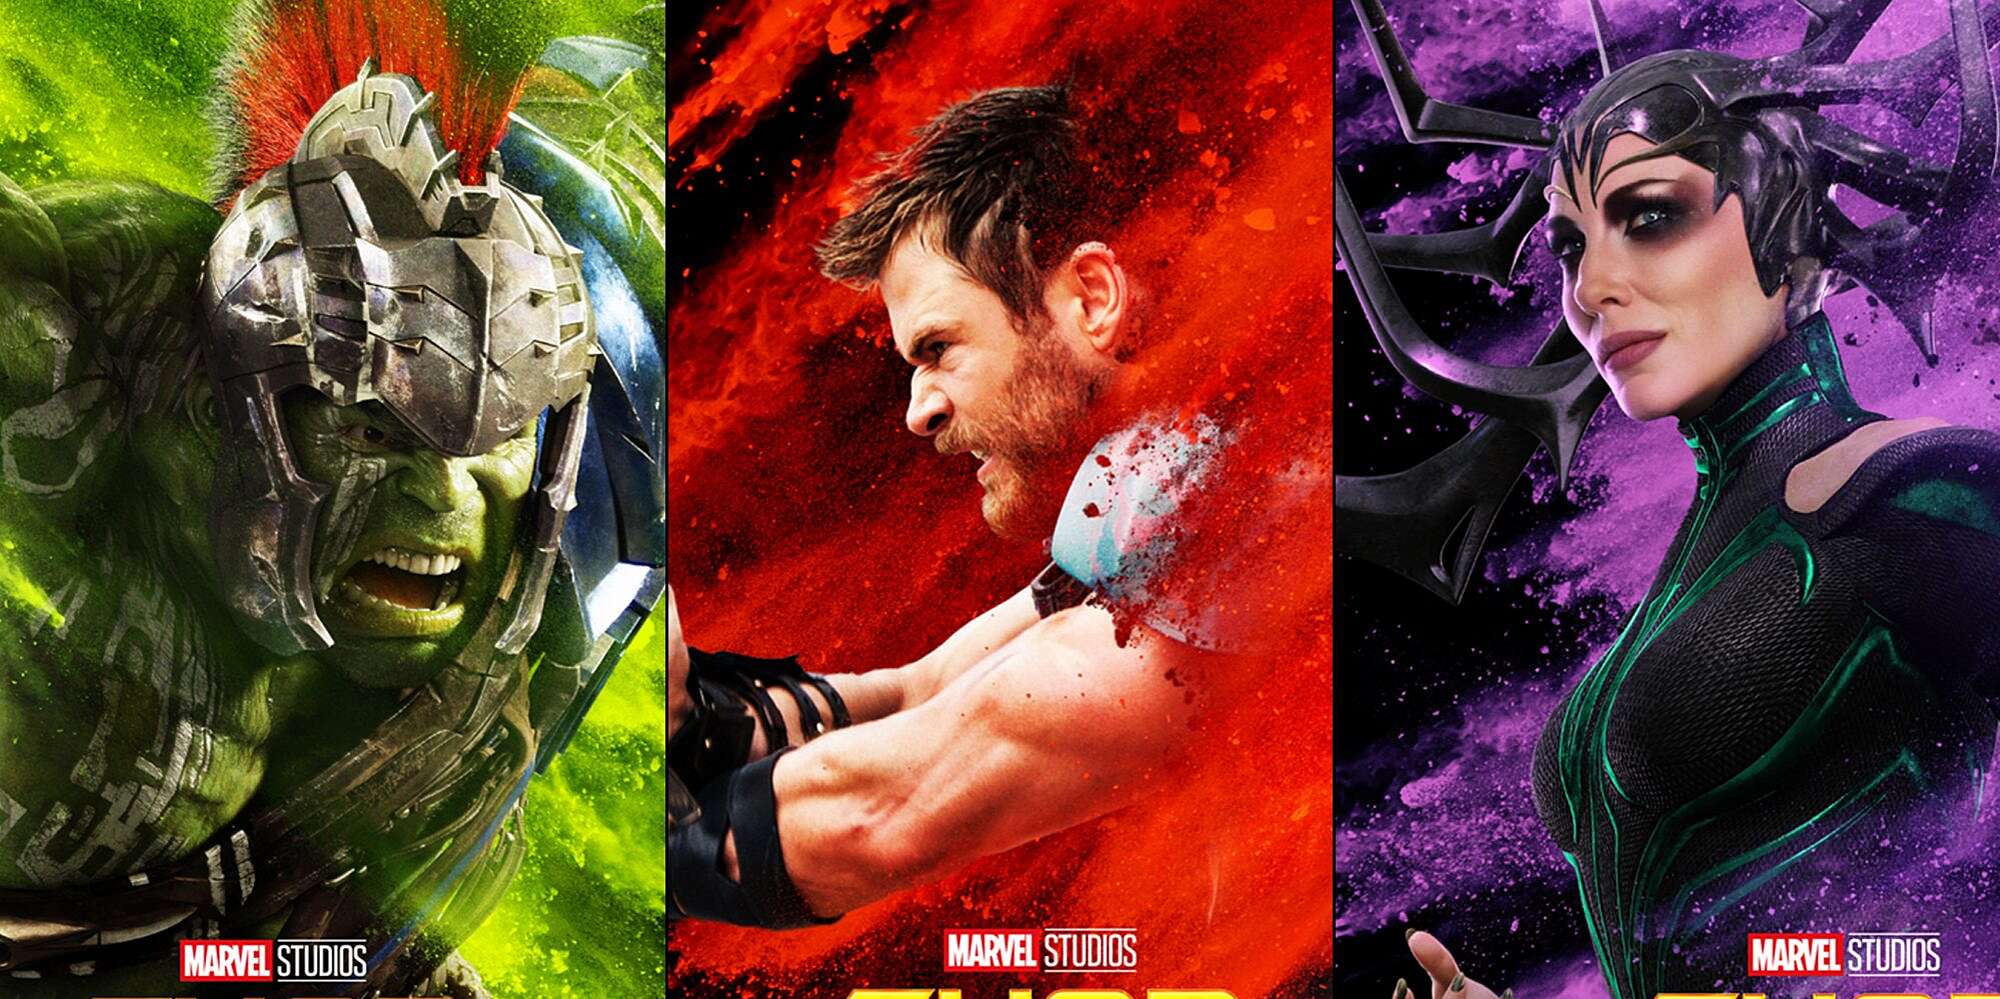 Thor: Ragnarok posters debut 8 new looks